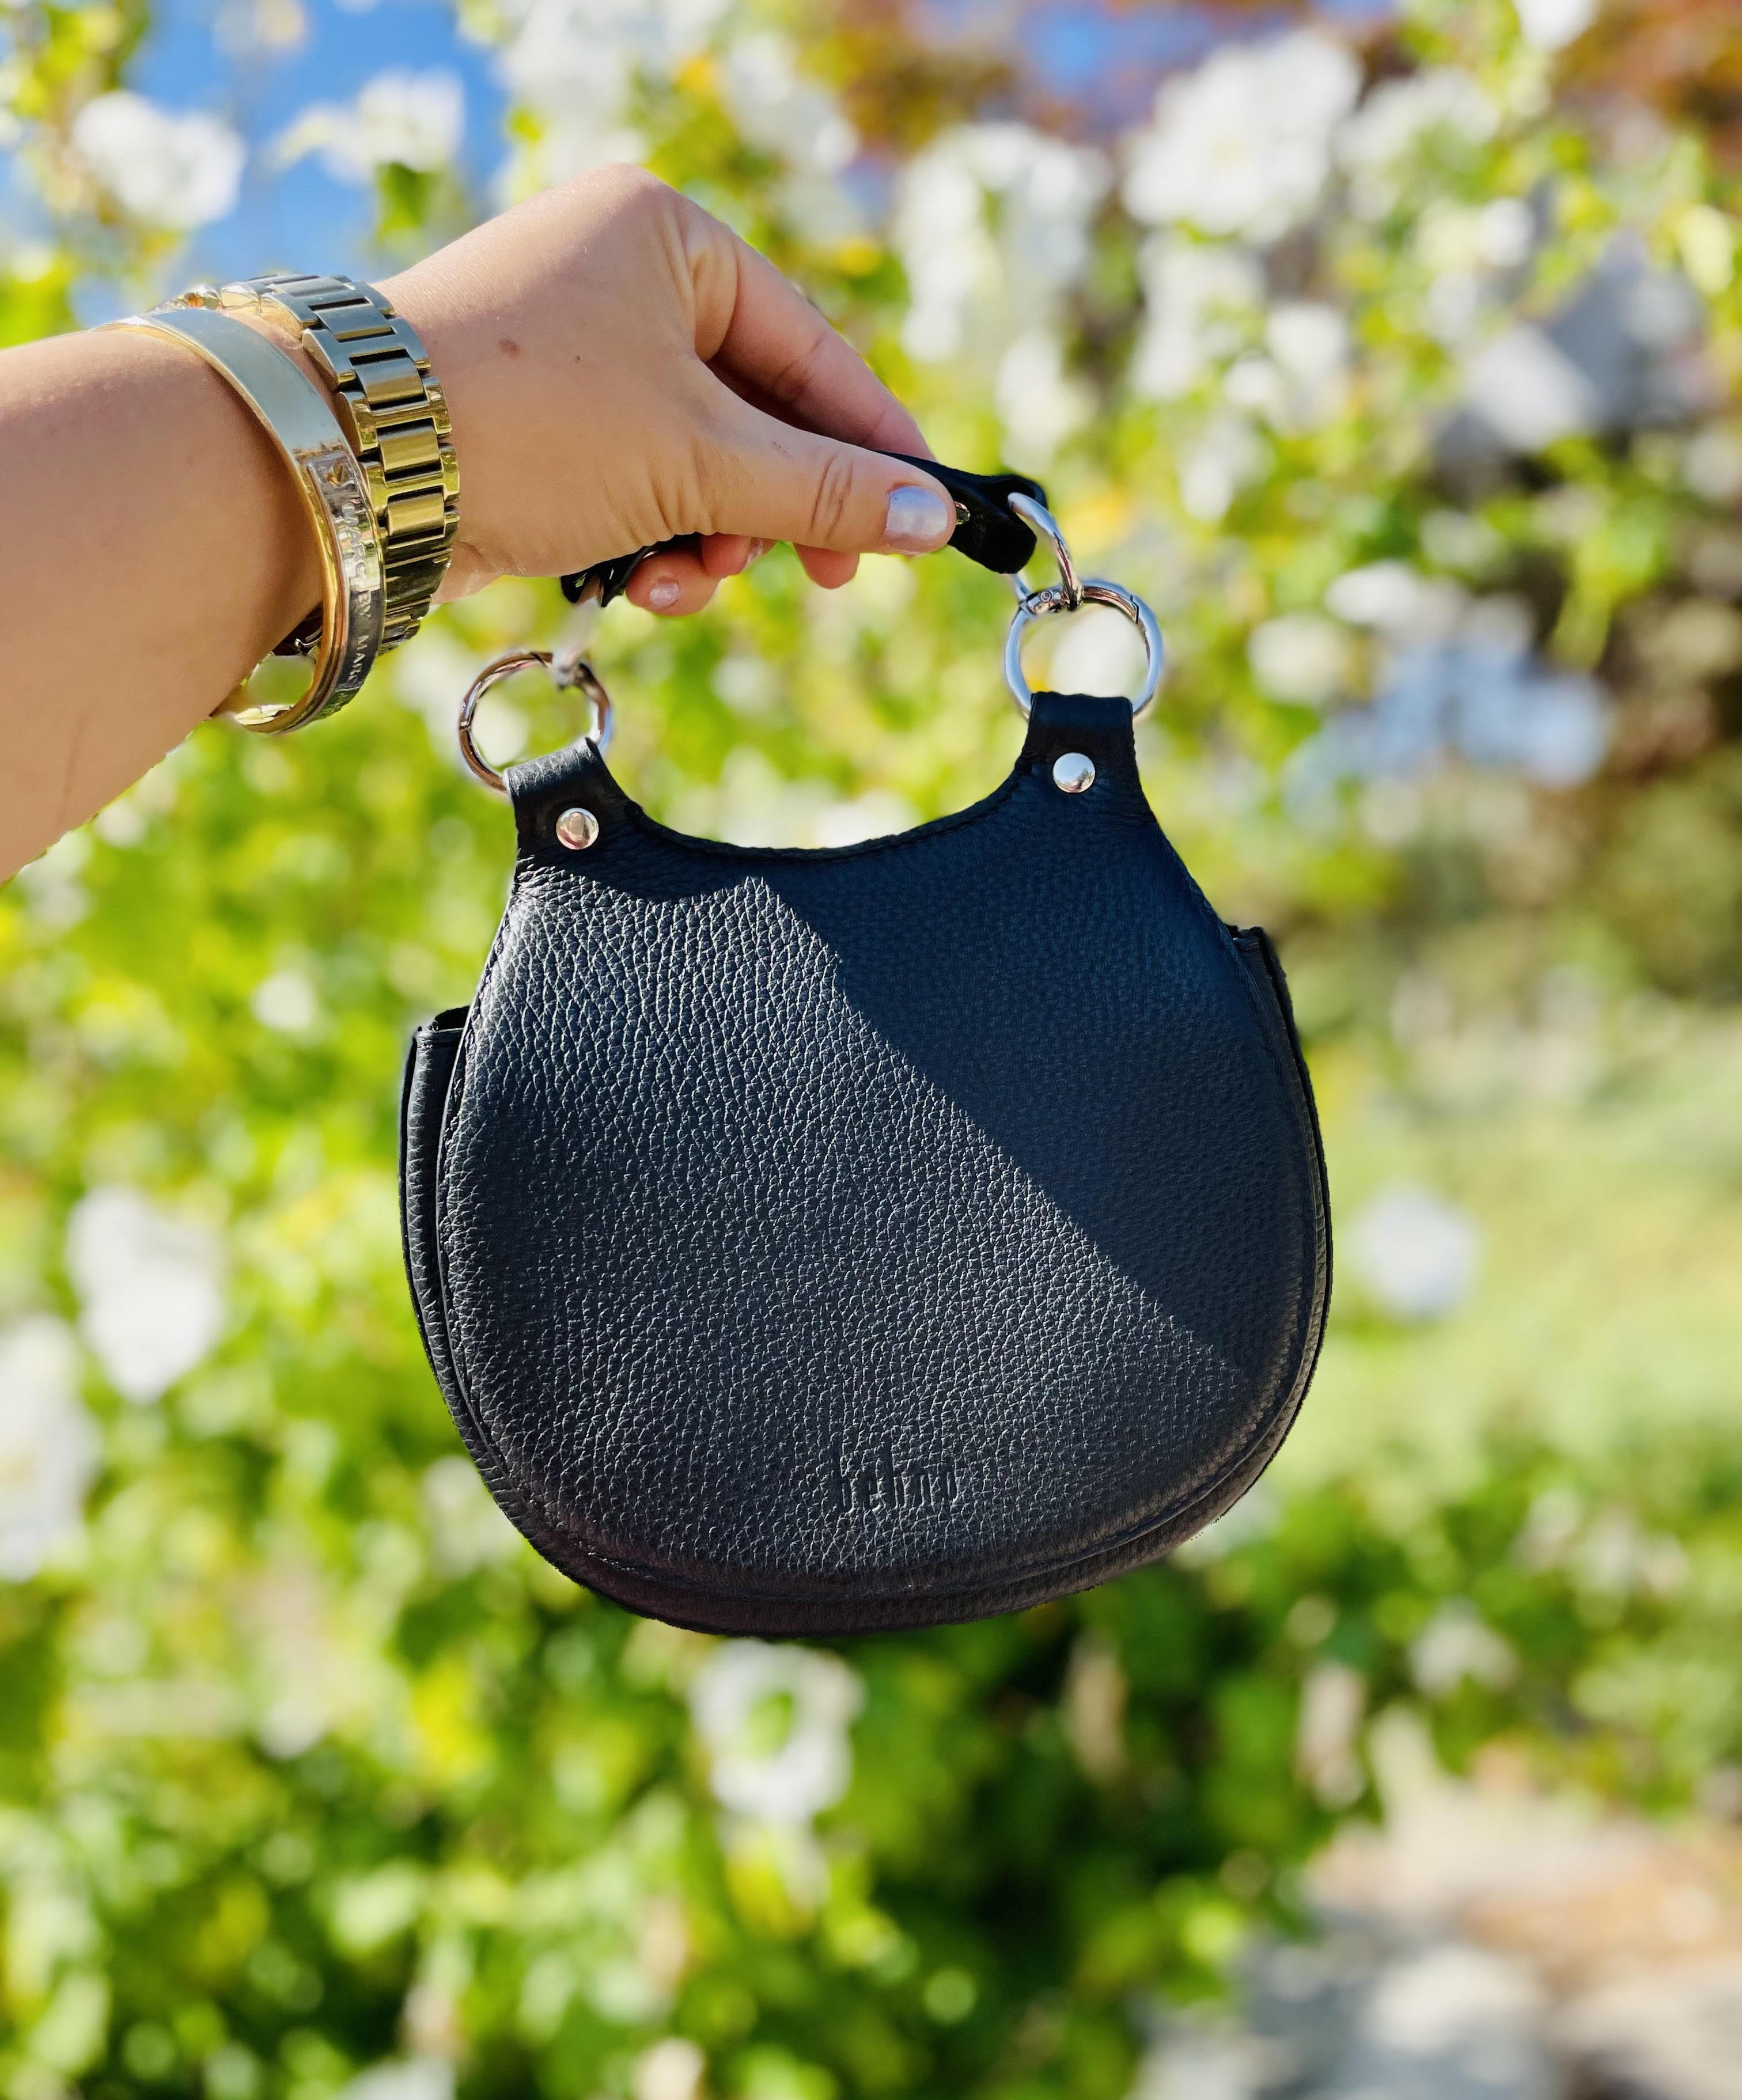 Behno Handbag review: Why we love this AAPI-owned accessory brand - Reviewed